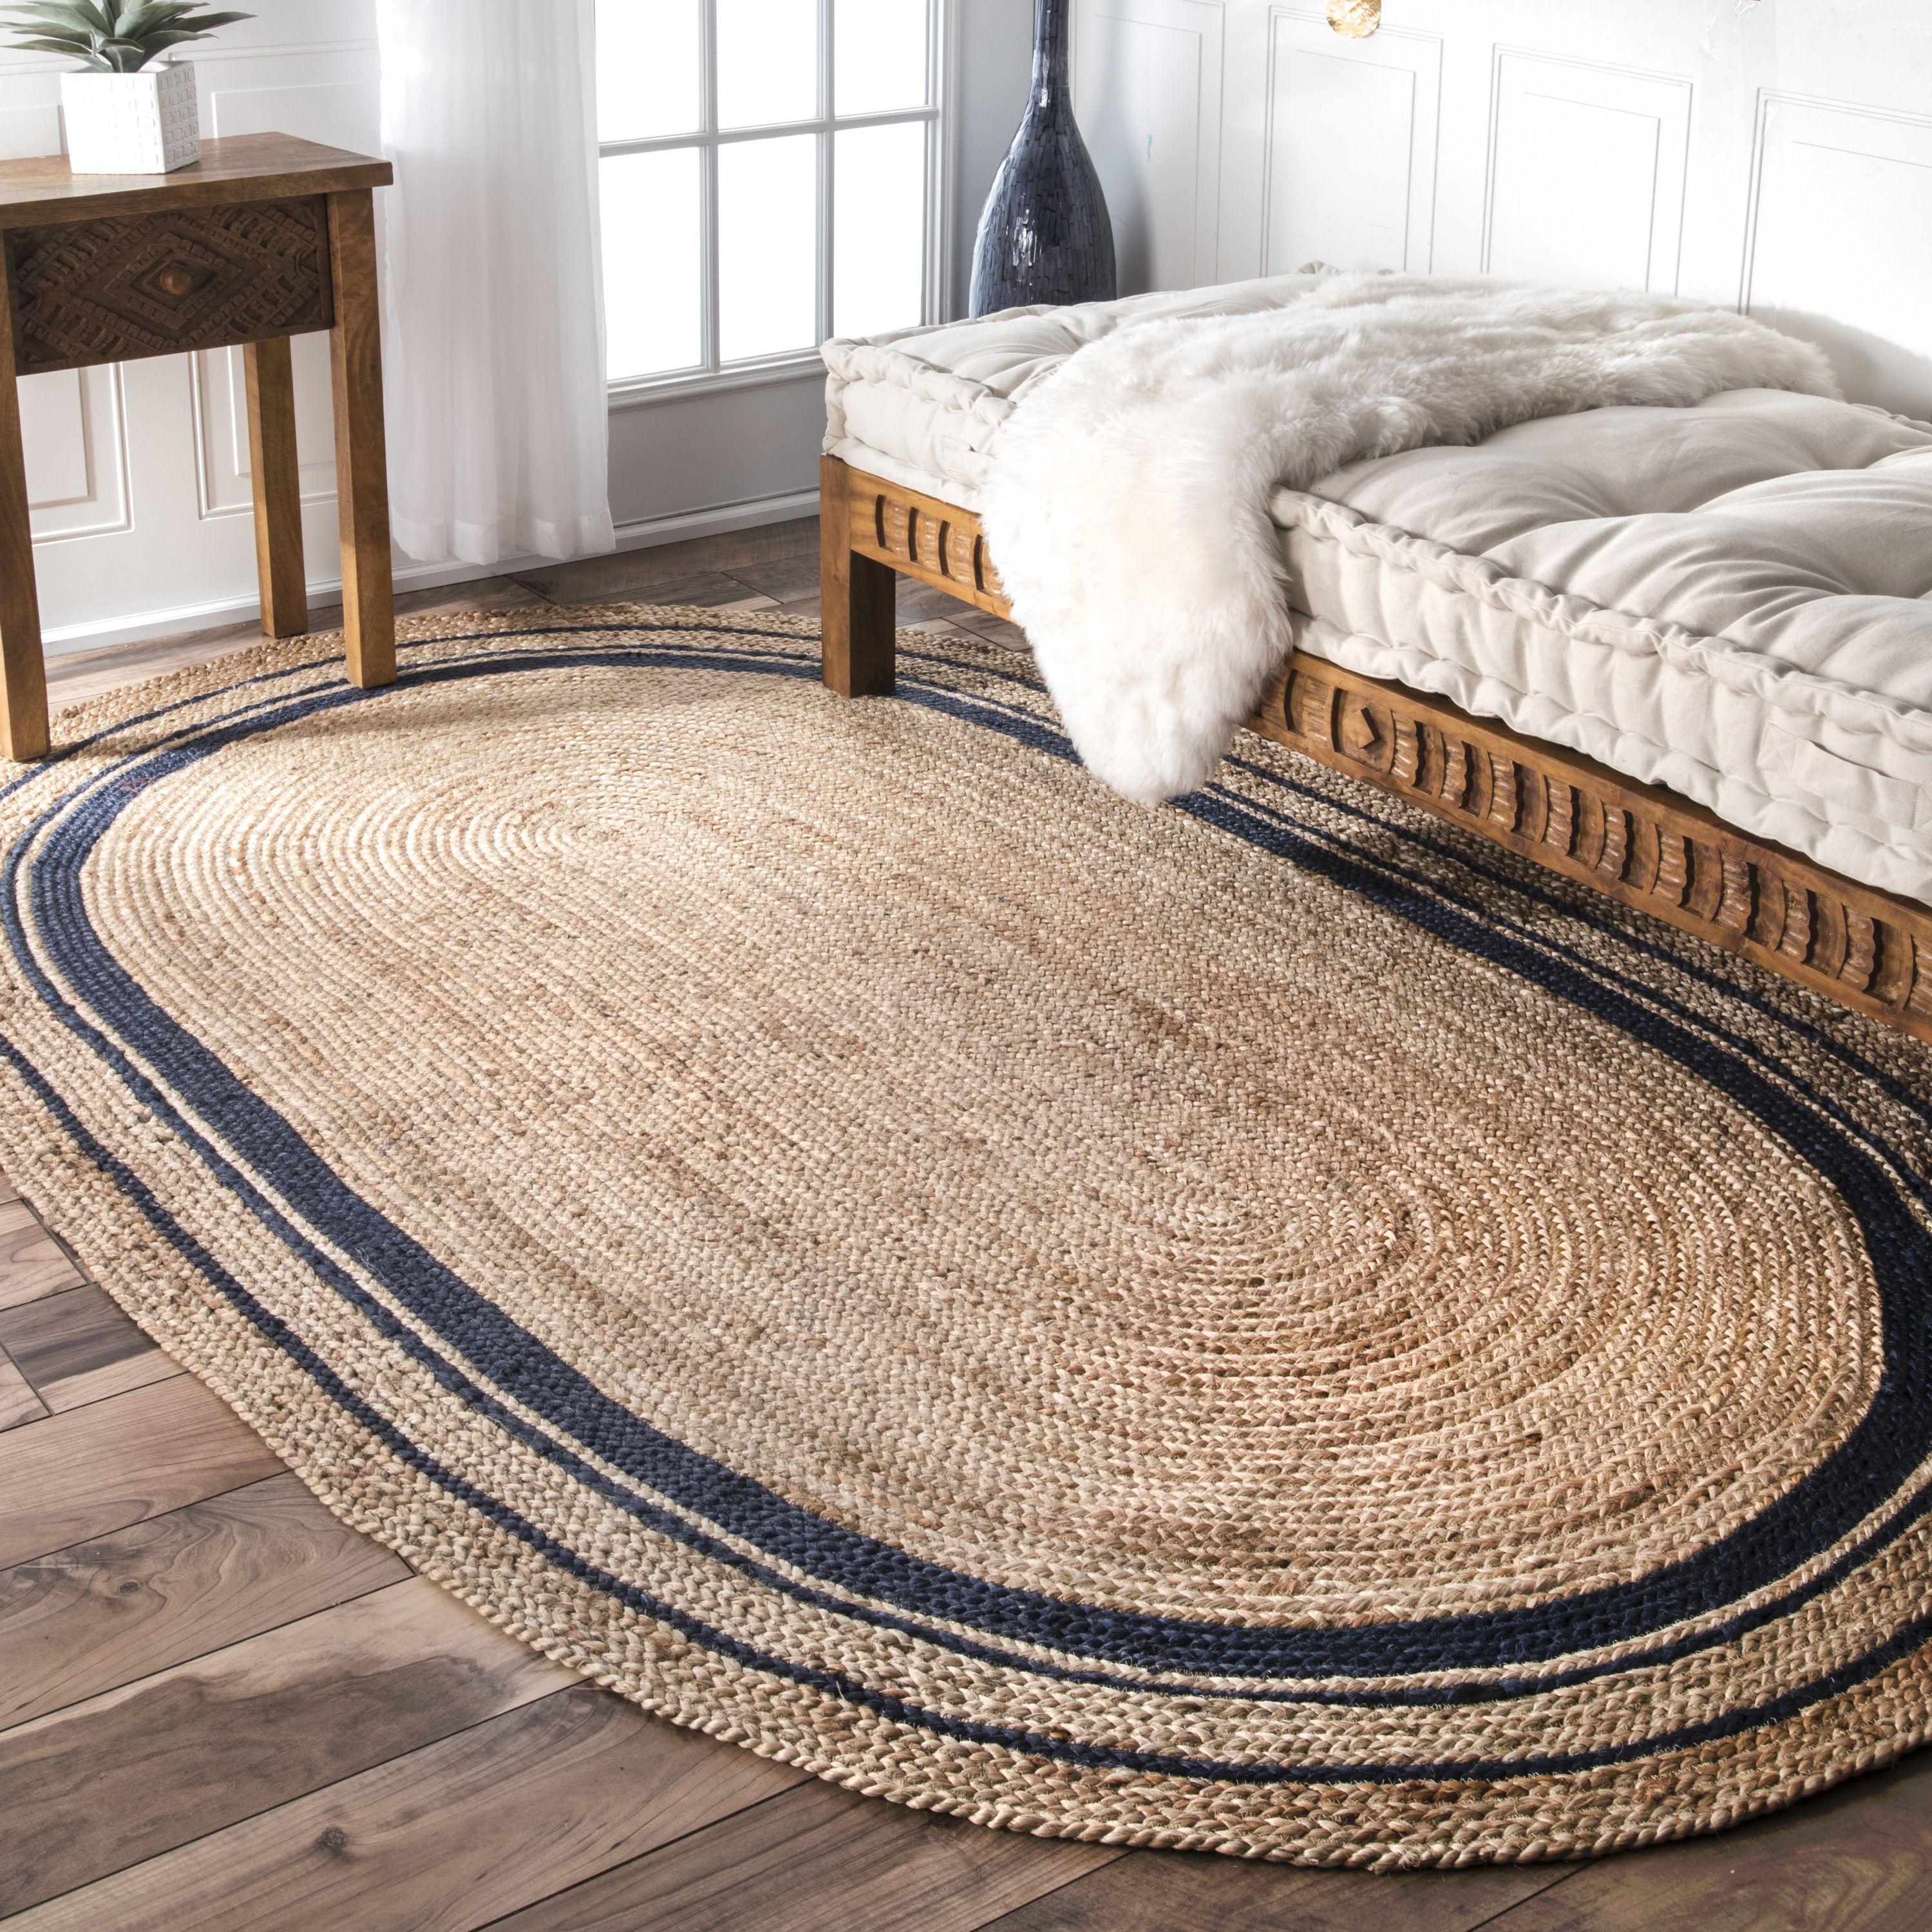 Nuloom 5 X 8 Braided Jute Navy Oval Indoor Border Area Rug In The Rugs  Department At Lowes With Oval Rugs (Photo 6 of 15)